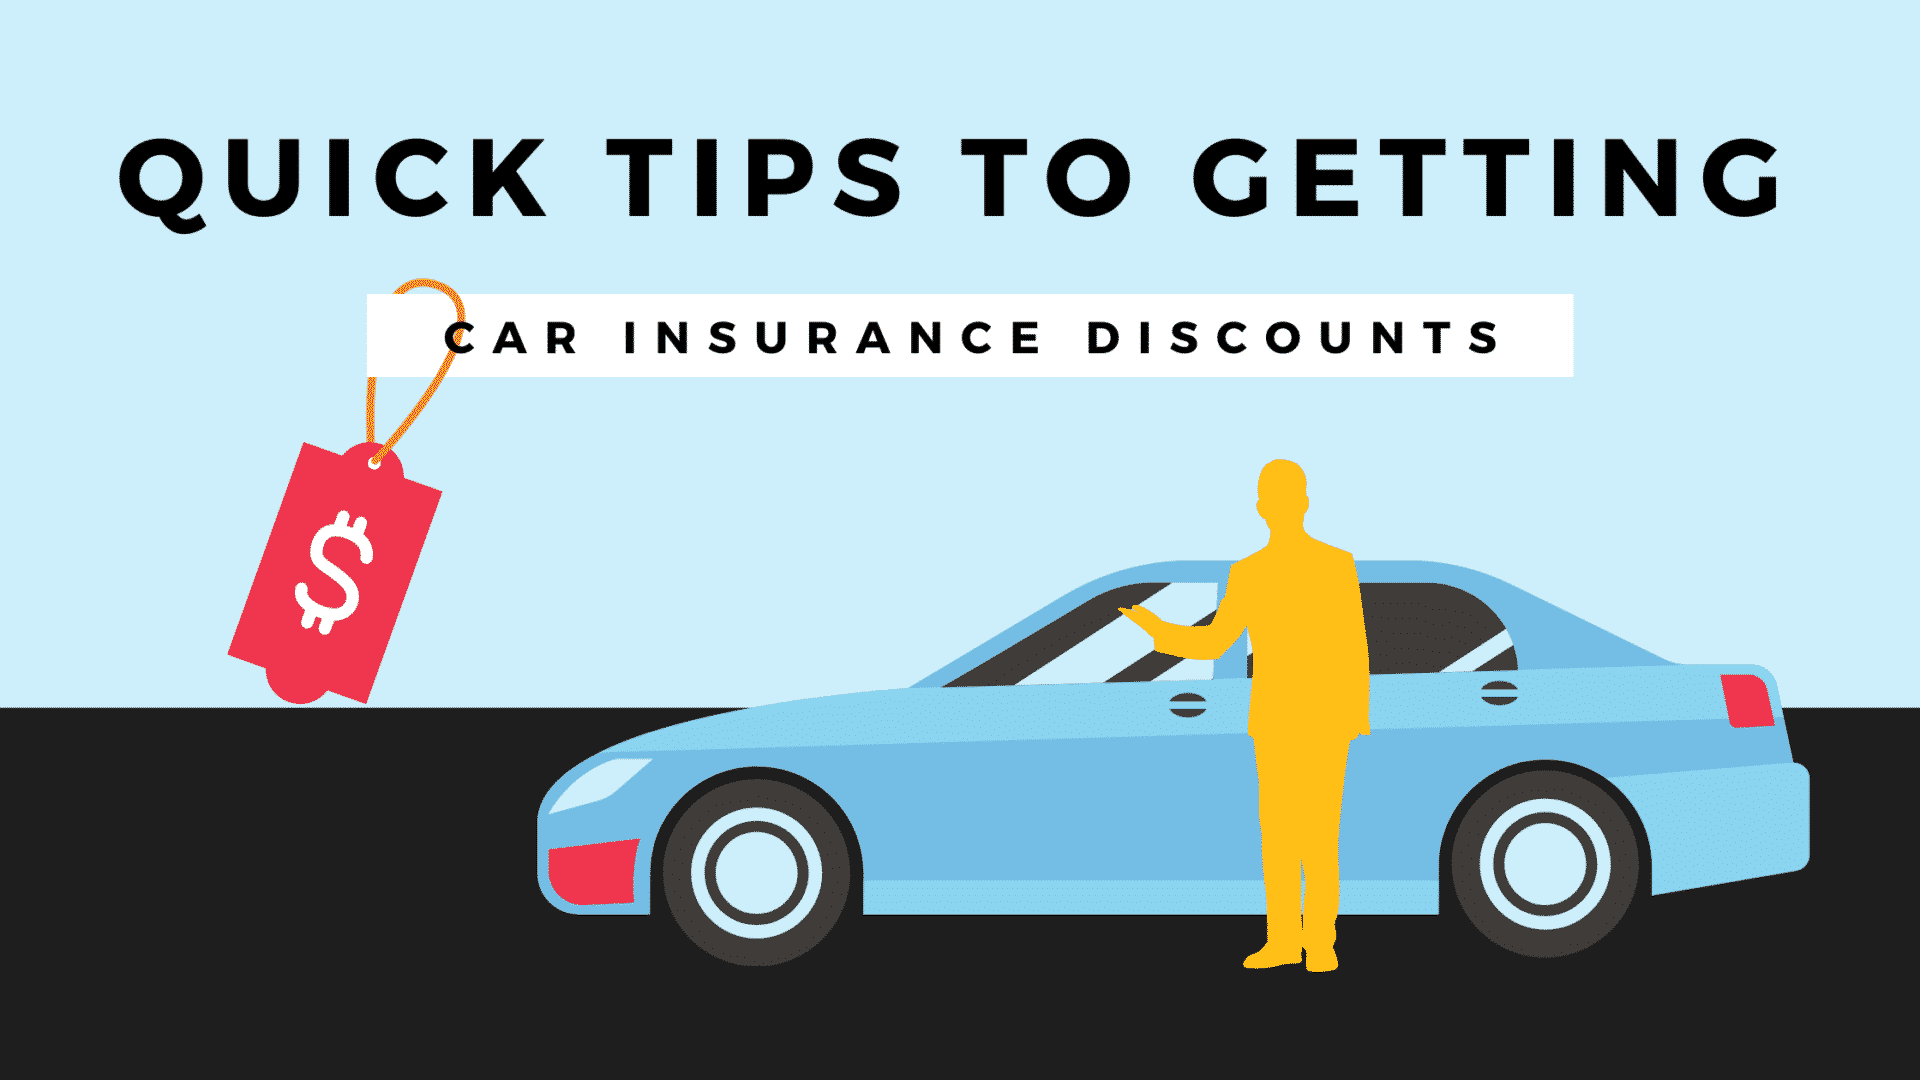 Car Insurance Discounts: Tips to get discount - Settle Insurance